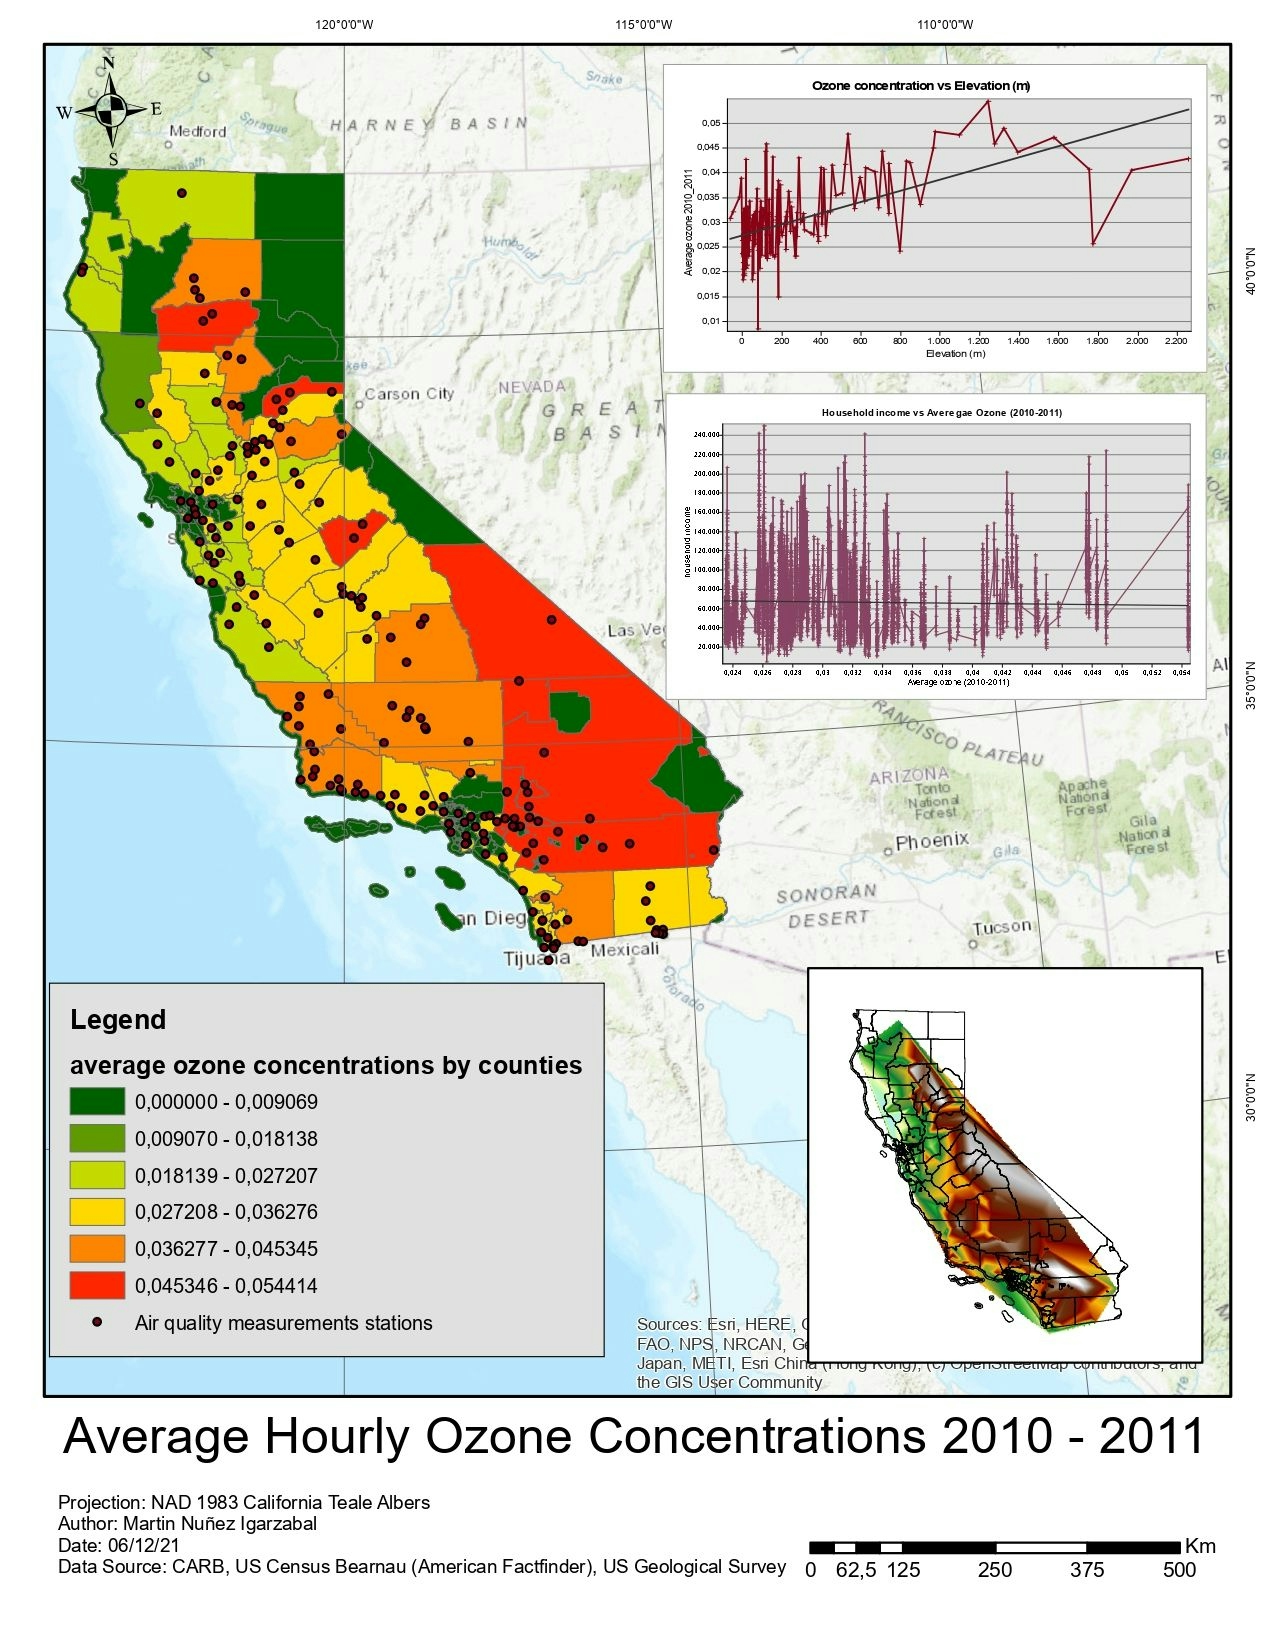 ArcGIS Map (Ozone concentration)